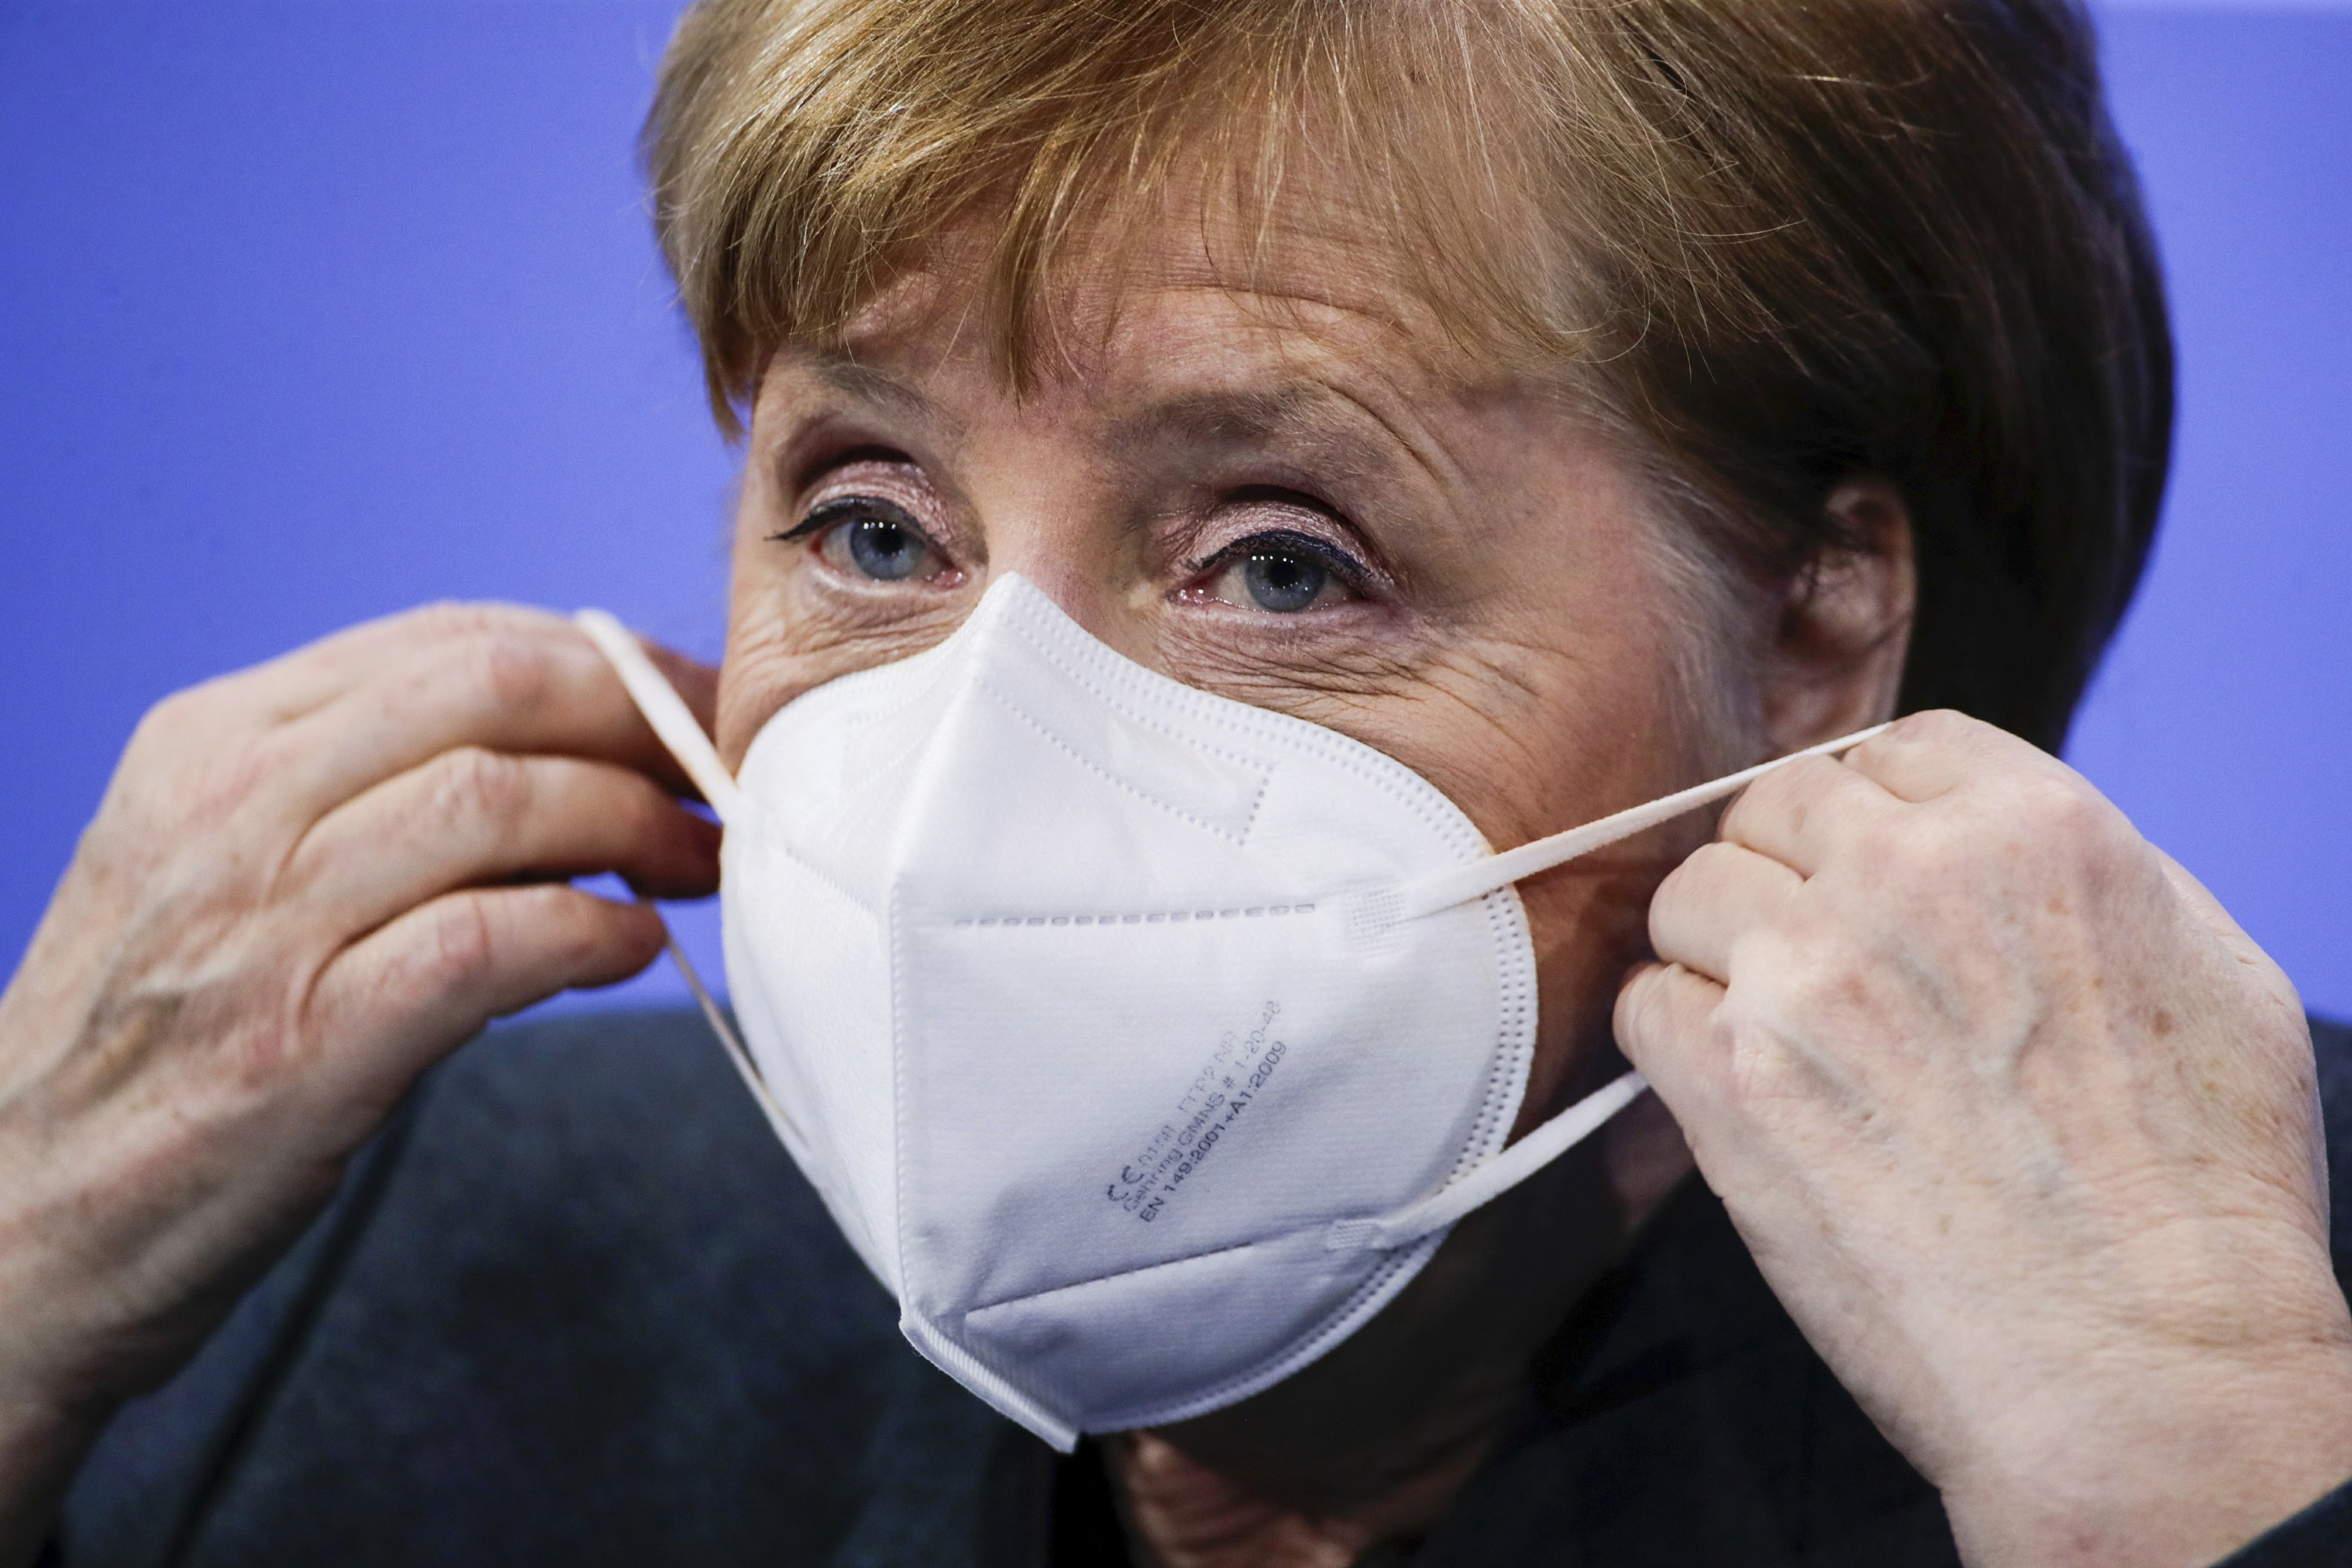 Germany to extend virus strike until mid-February